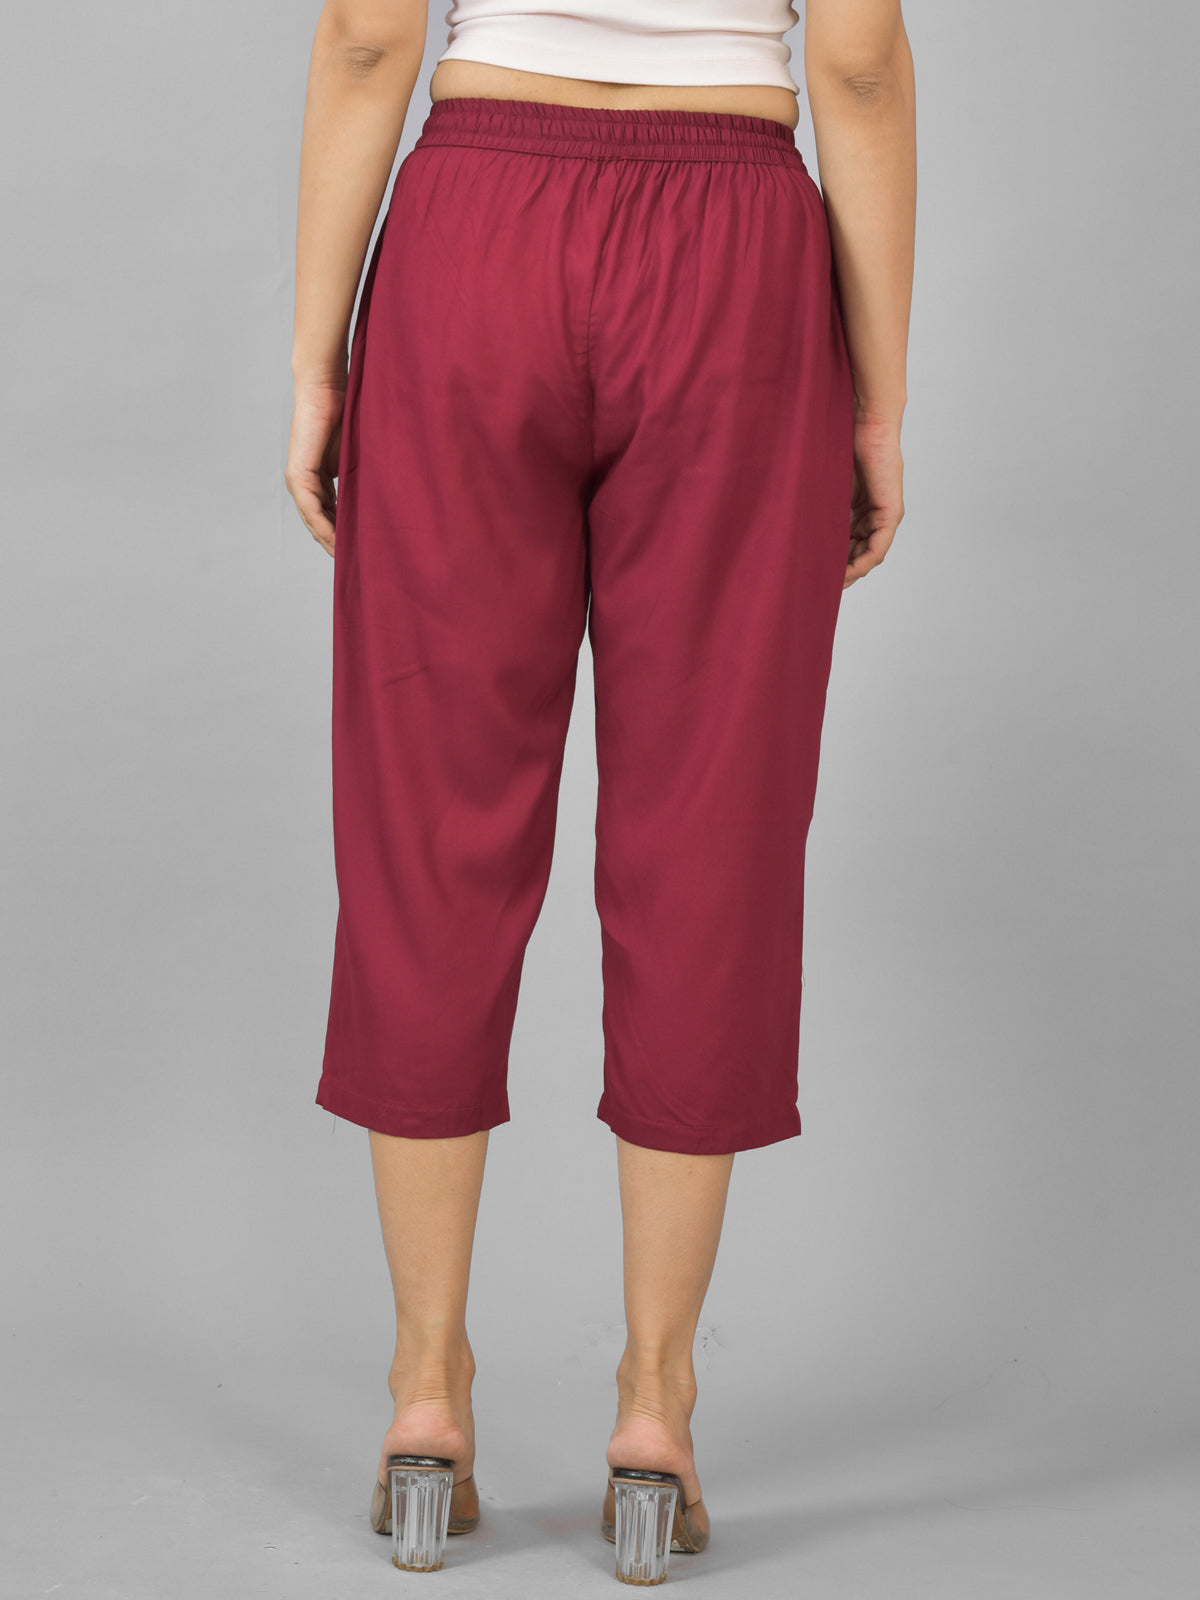 Pack Of 2 Womens Dark Grey And Wine Calf Length Rayon Culottes Trouser Combo